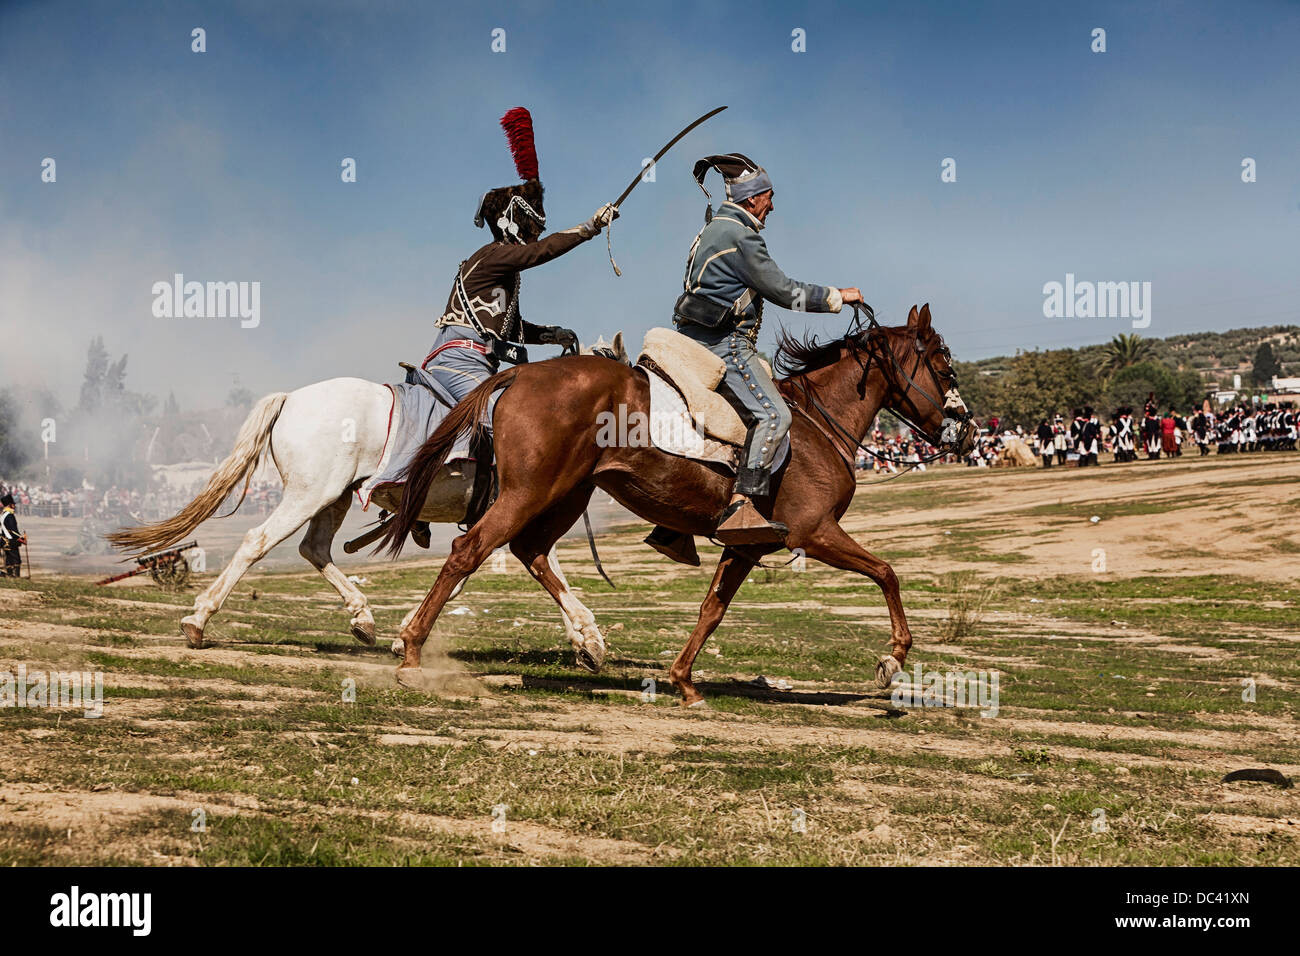 Bandit in the commemoration of the battle of Bailen, Jaen province, Andalusia, Spain, Take on October 8, 2011 Stock Photo